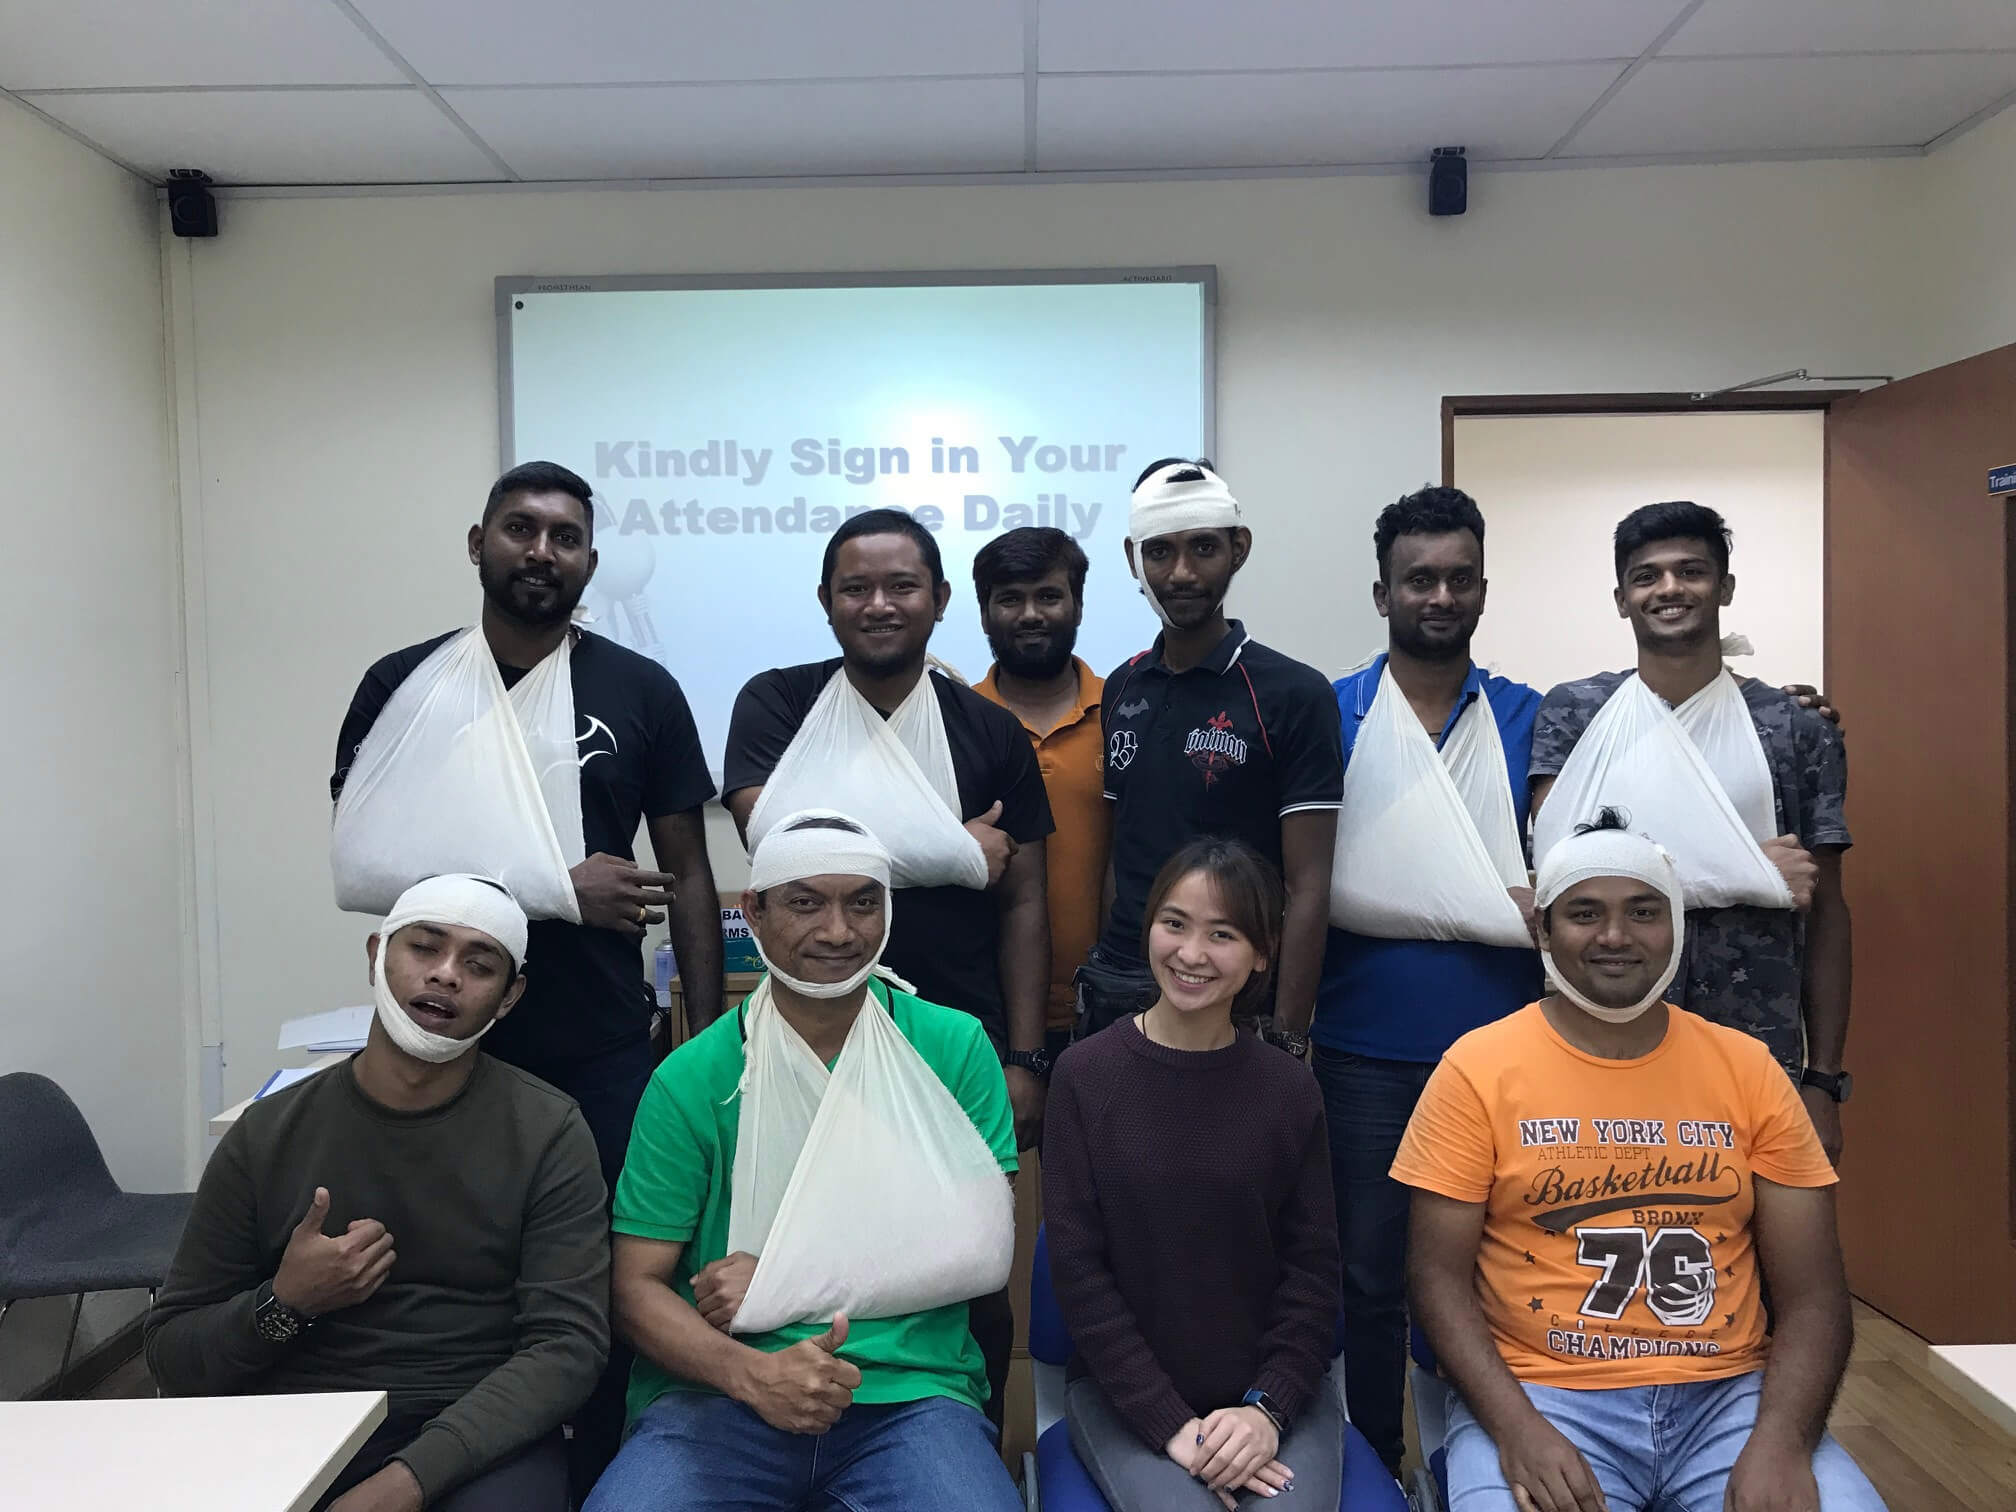 ISO 29990 Occupational First Aid (Singapore) 16-18 Apr 2018